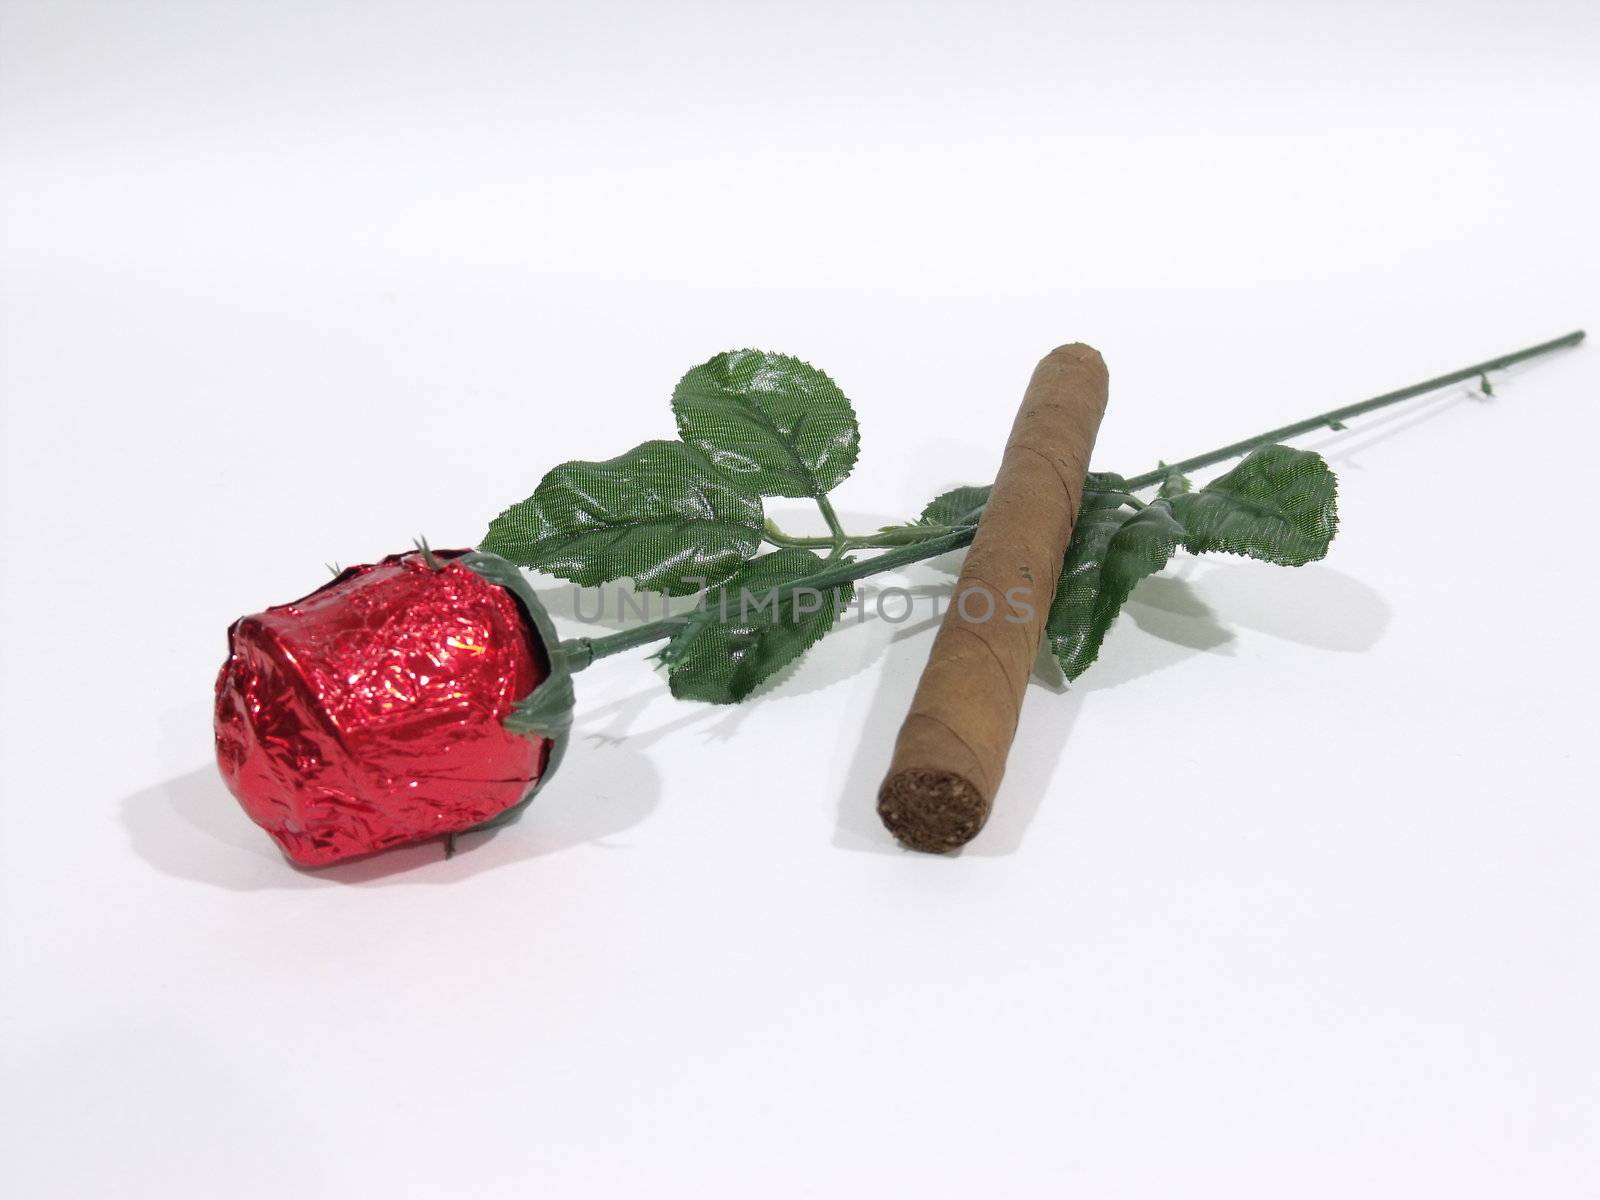 Unlighted cigar lying on a artificial red rose on a white surface